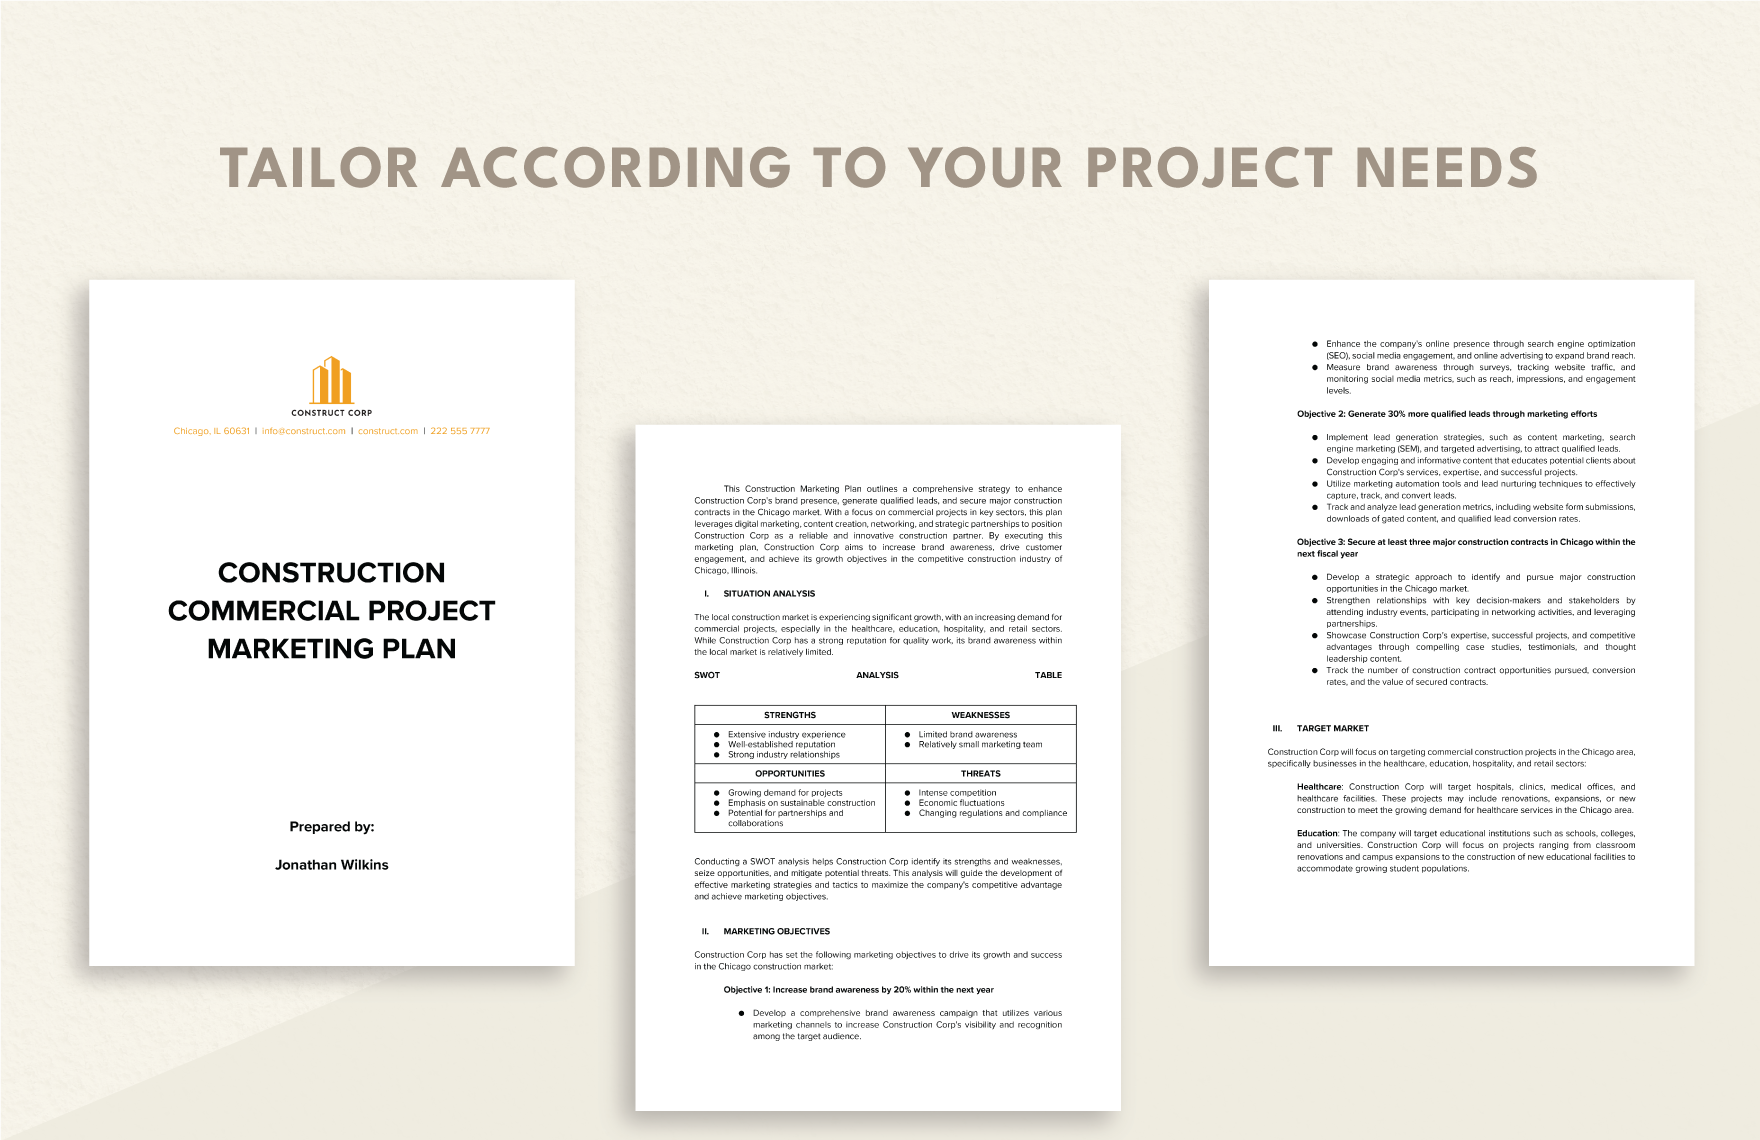 Construction Commercial Project Marketing Plan